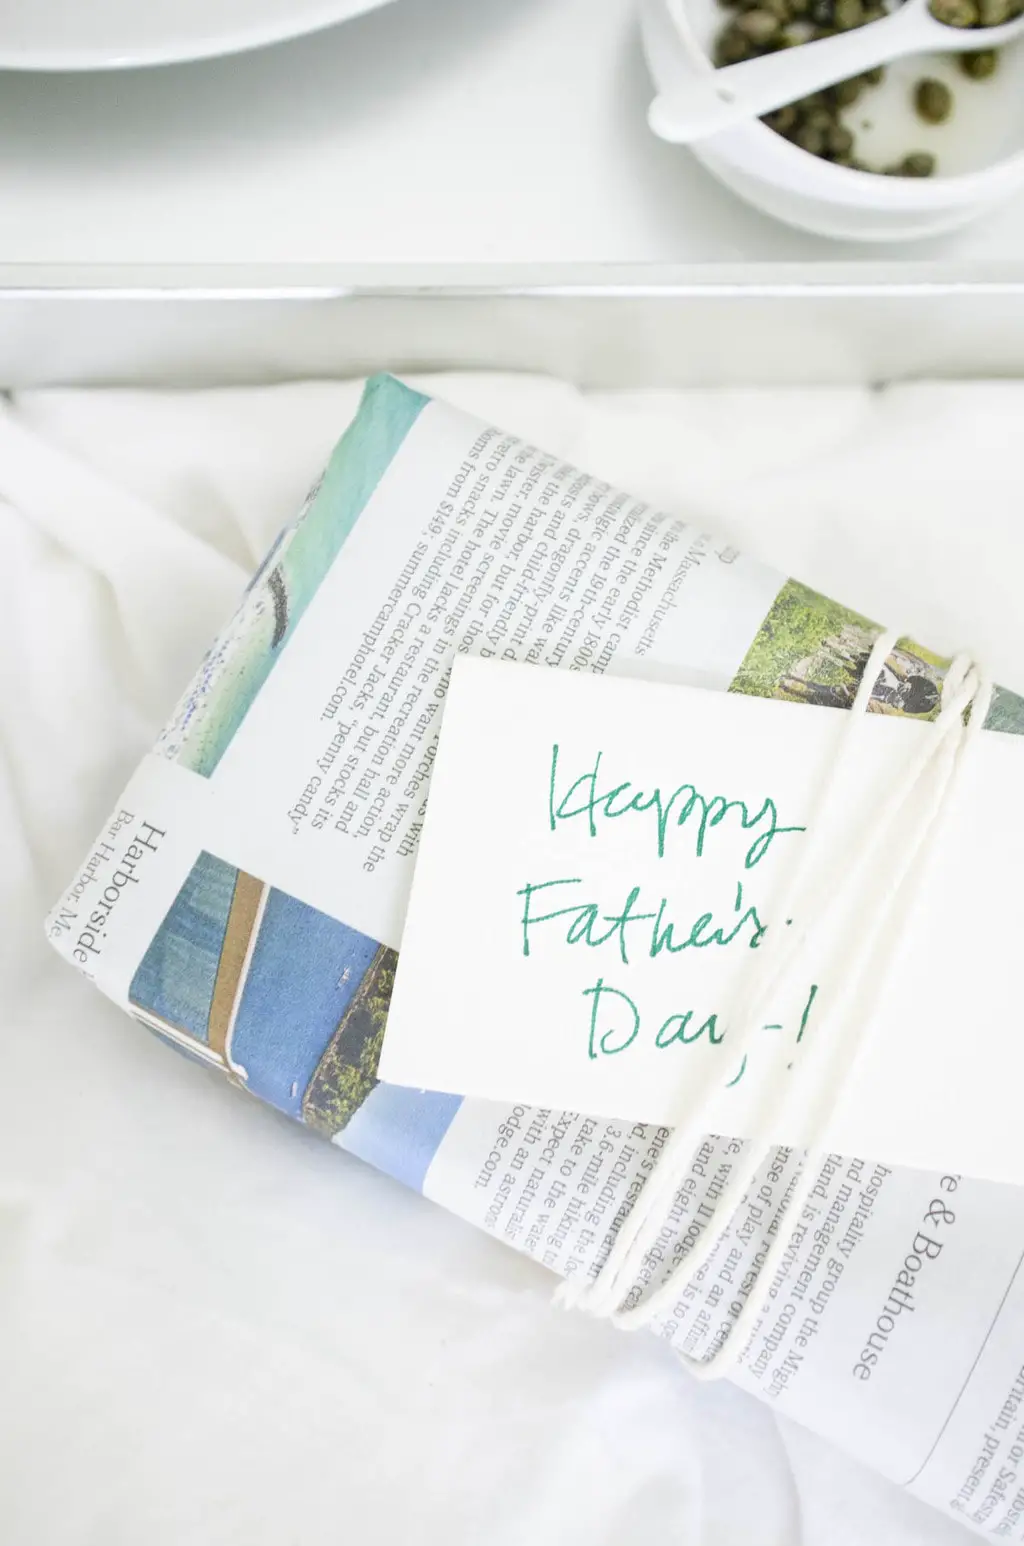 Breakfast in bed for Father's Day with Baxter on @thouswellblog